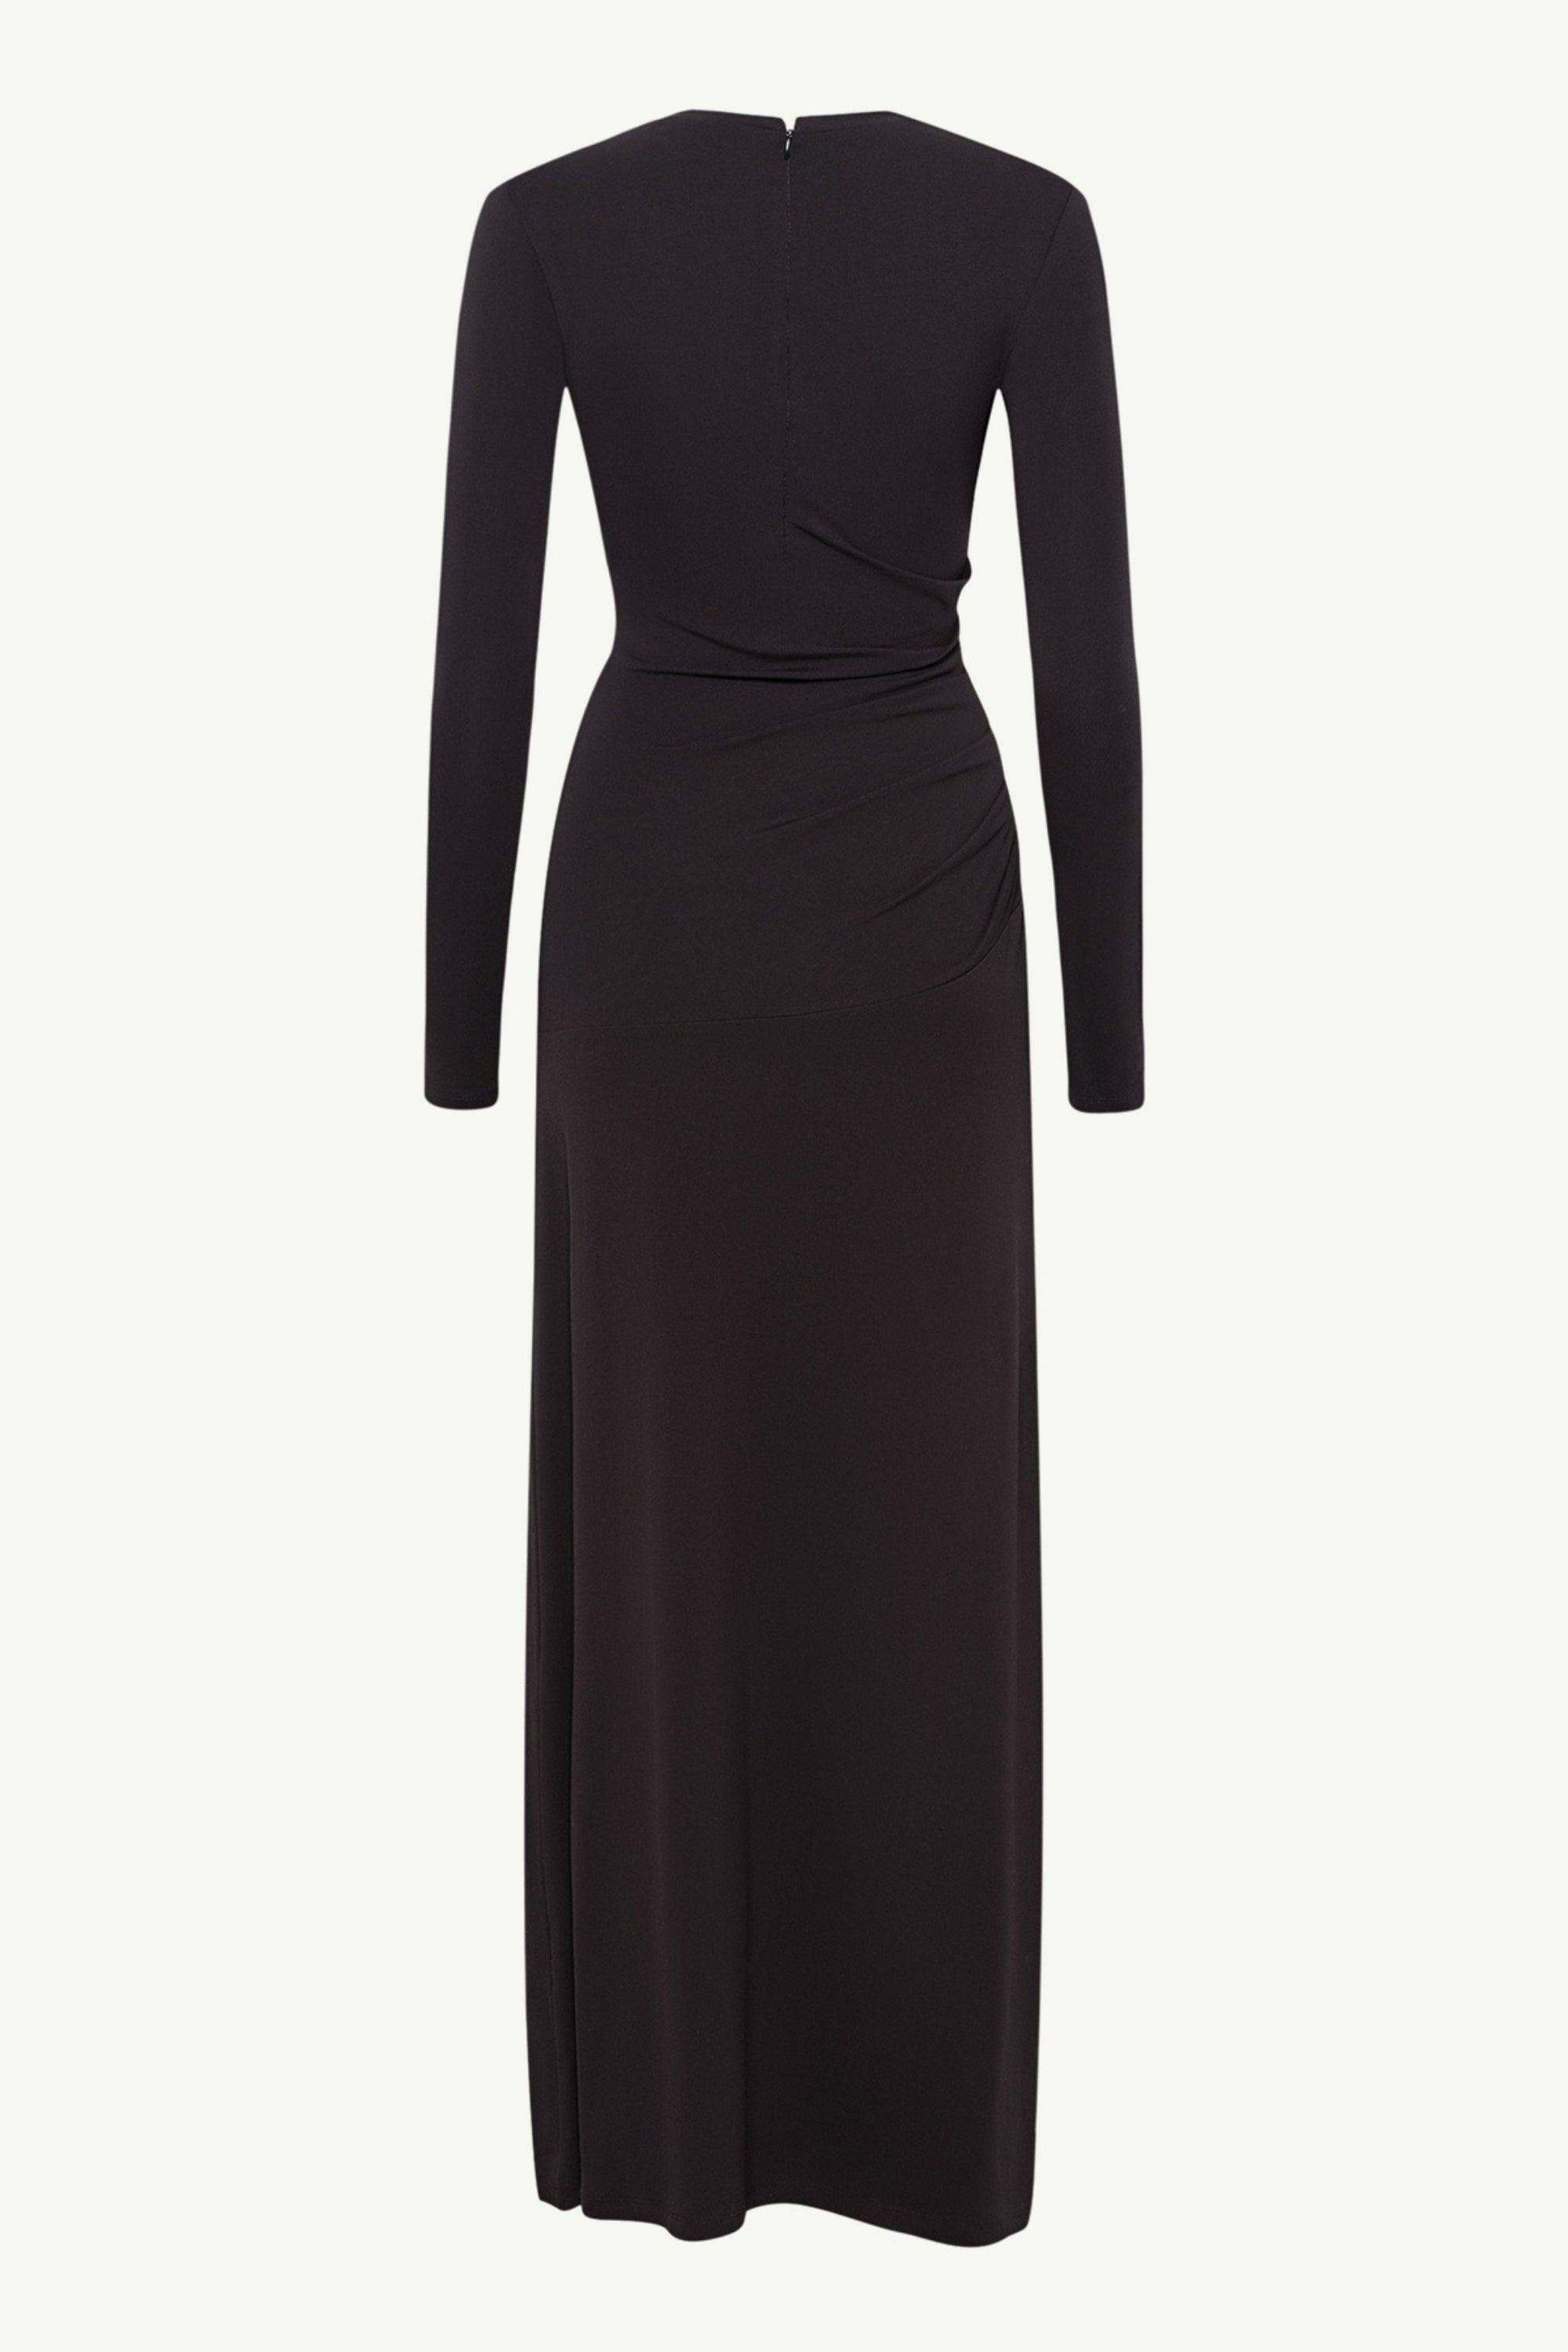 Natalie Rouched Jersey Maxi Dress - Black Clothing Veiled 